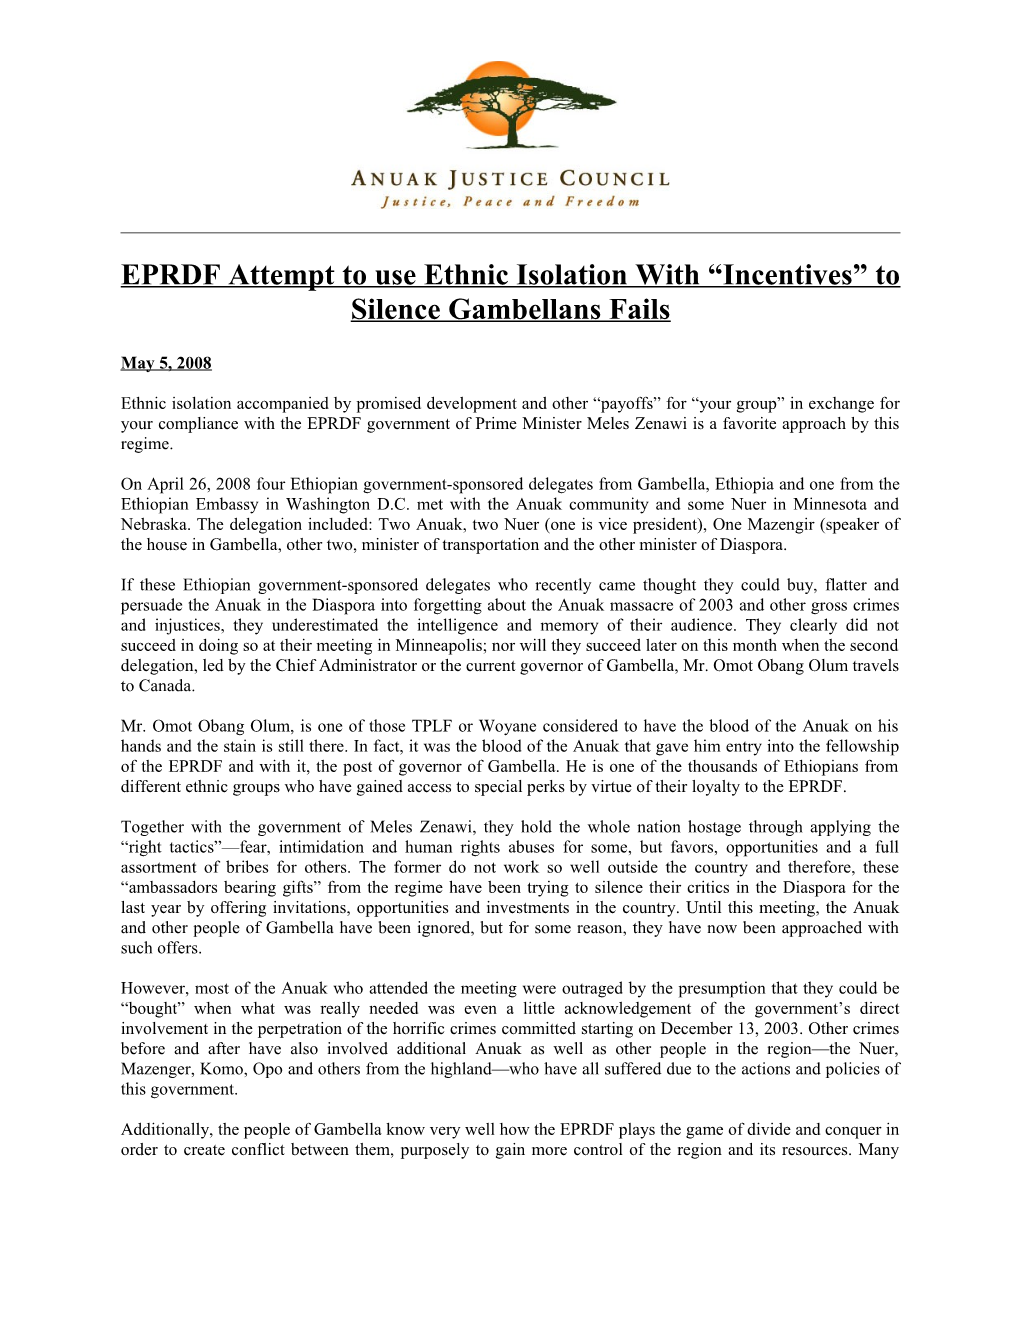 EPRDF Attempt to Use Ethnic Isolation with Incentives to Silence Gambellans Fails